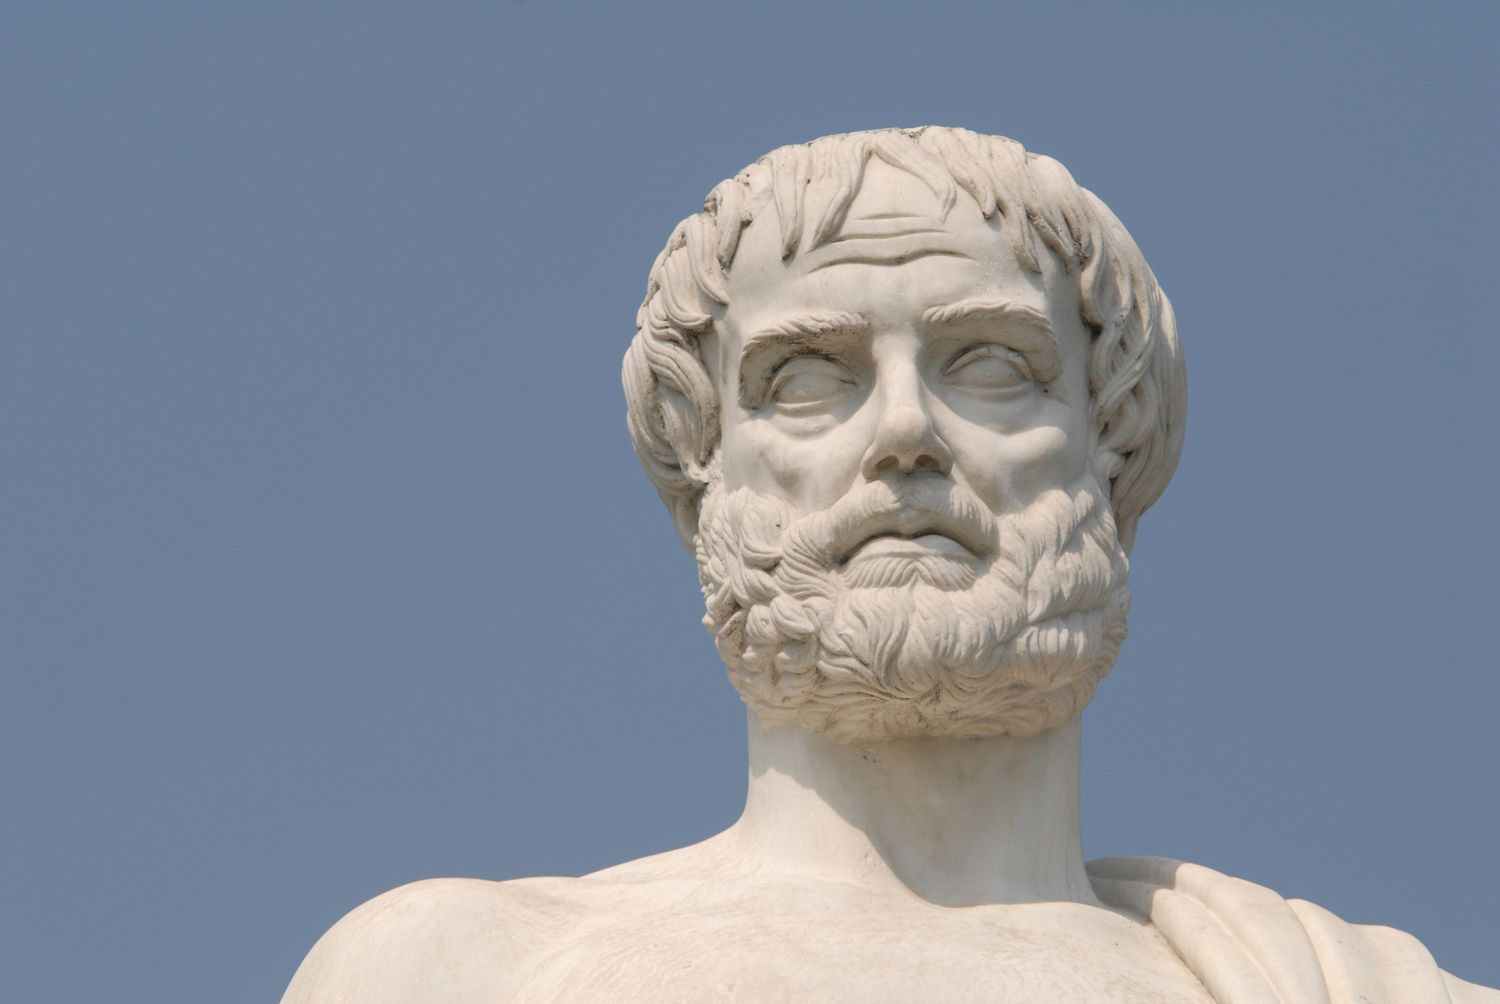 What did Aristotle say about the mind